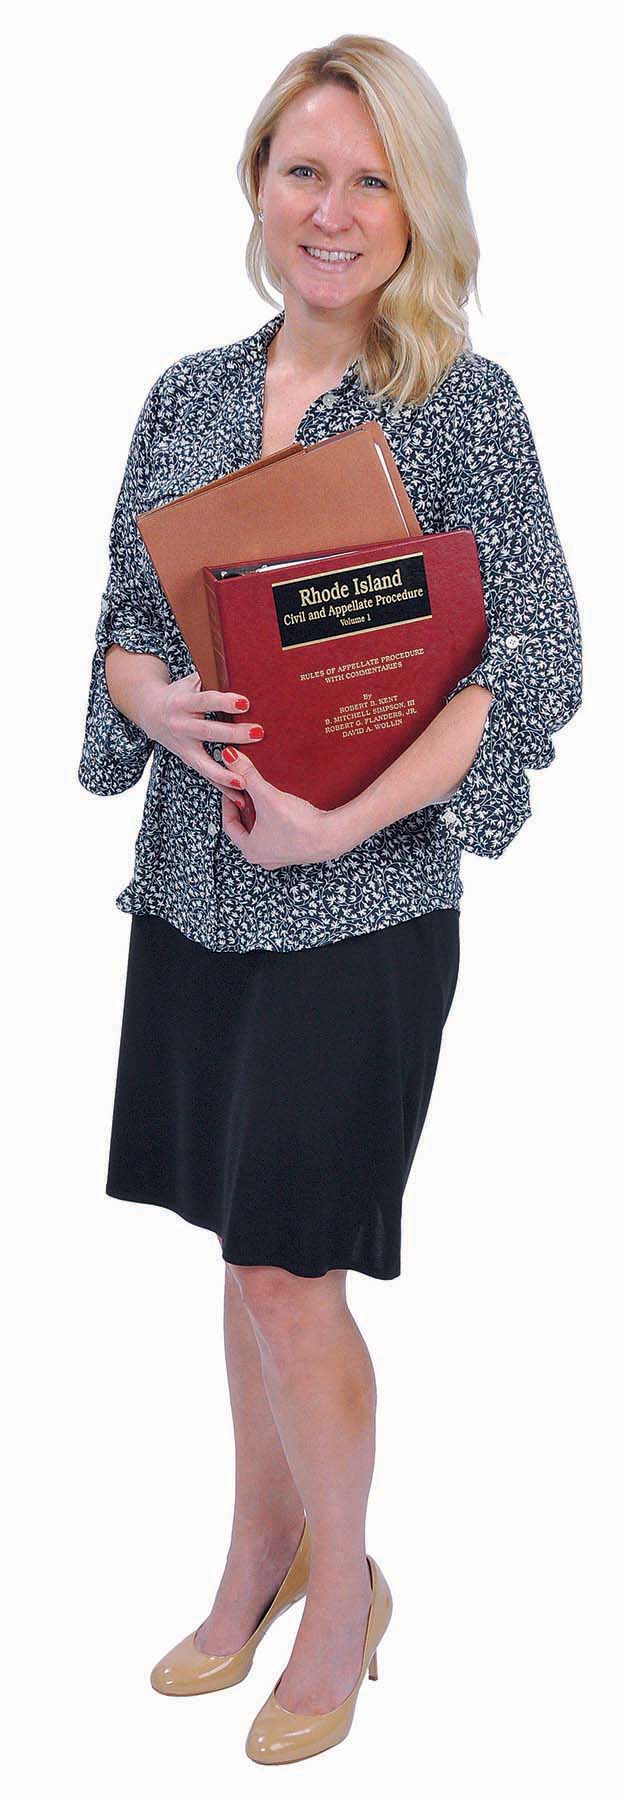 THE PROP: Sally P. McDonald seems to have a placid personality, but the law, represented by the state civil and appellate procedure manual in her hands, can bring out another side.